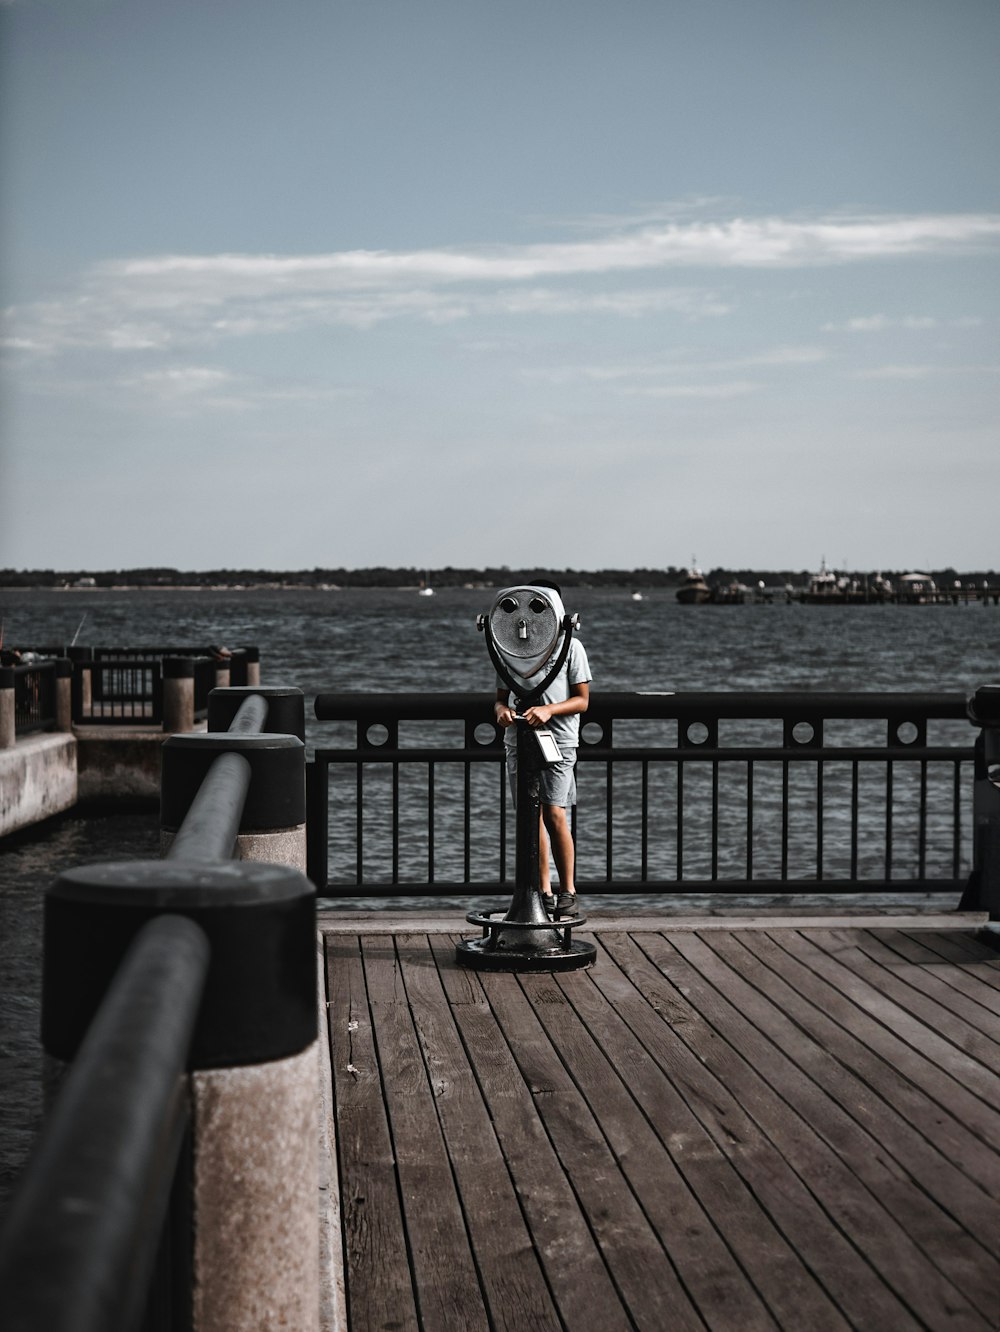 a person standing on a skateboard on a pier